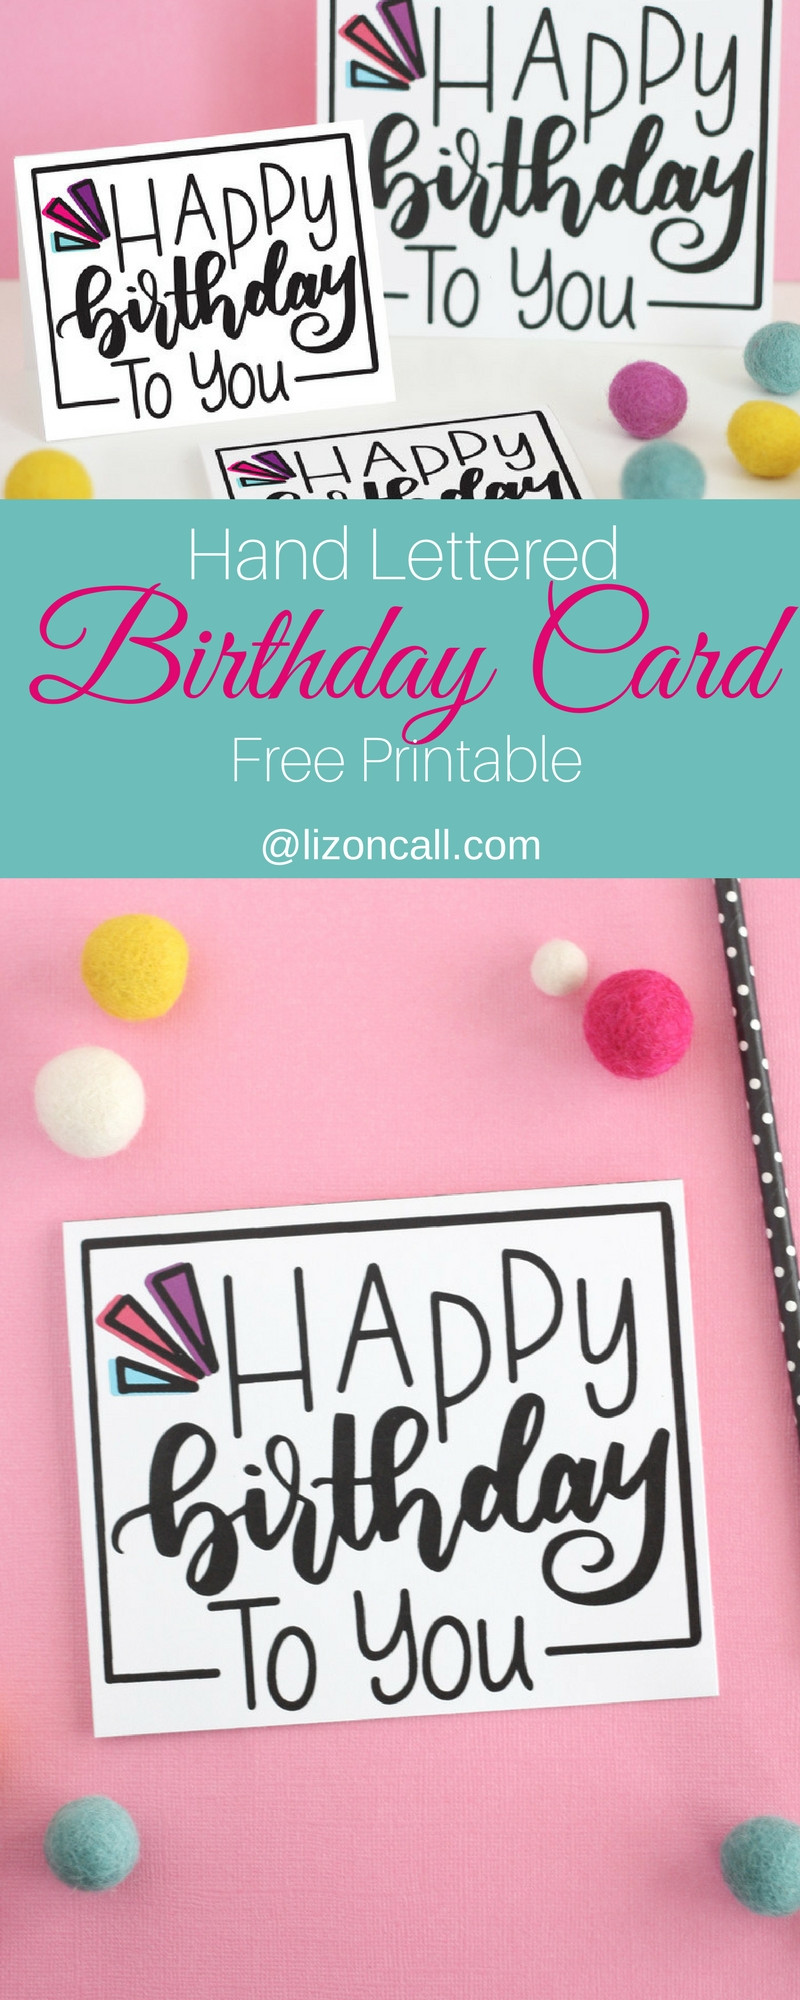 Birthday Cards To Print
 Hand Lettered Free Printable Birthday Card Liz on Call